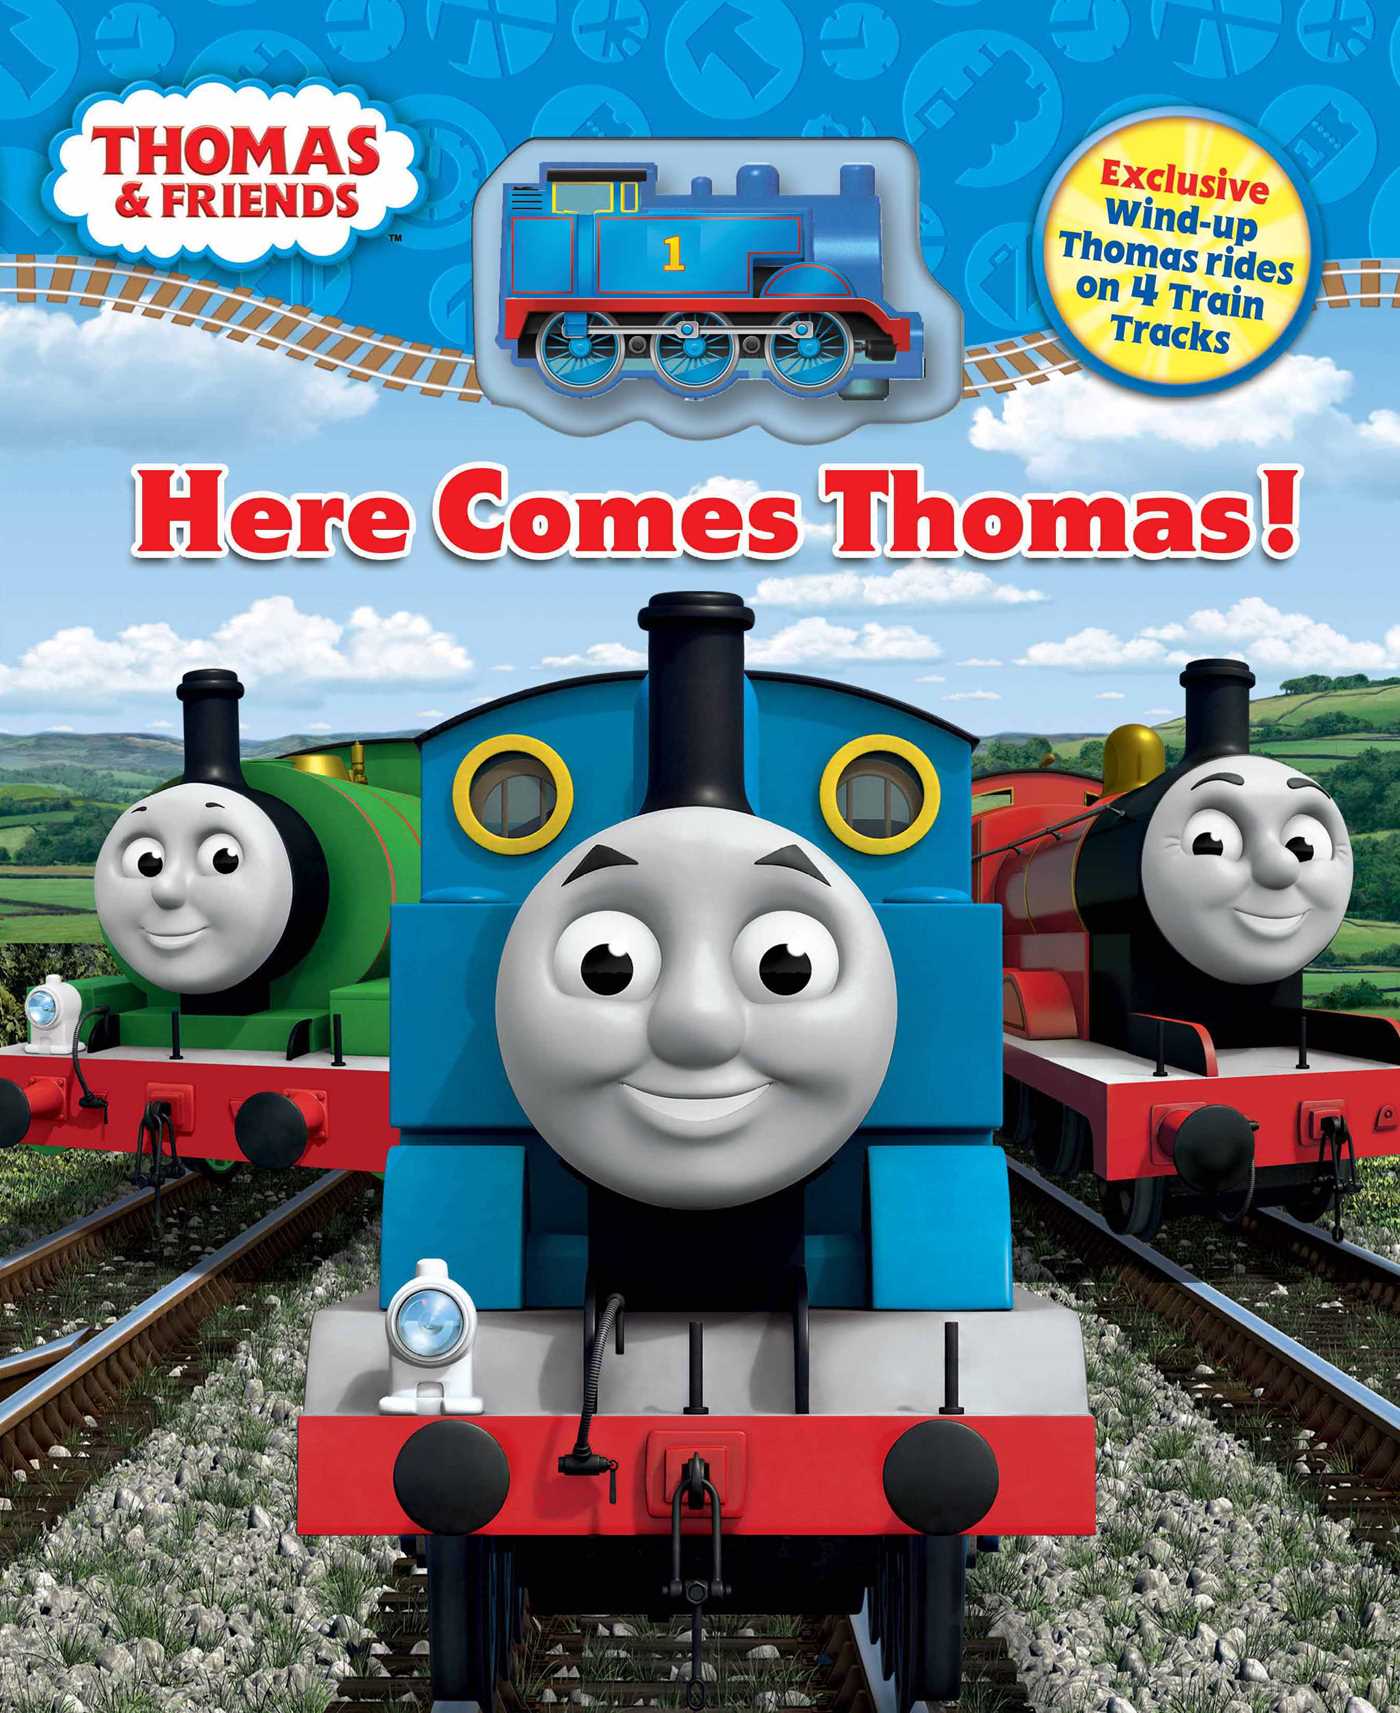 Picture Of Thomas And Friends. Free on Art